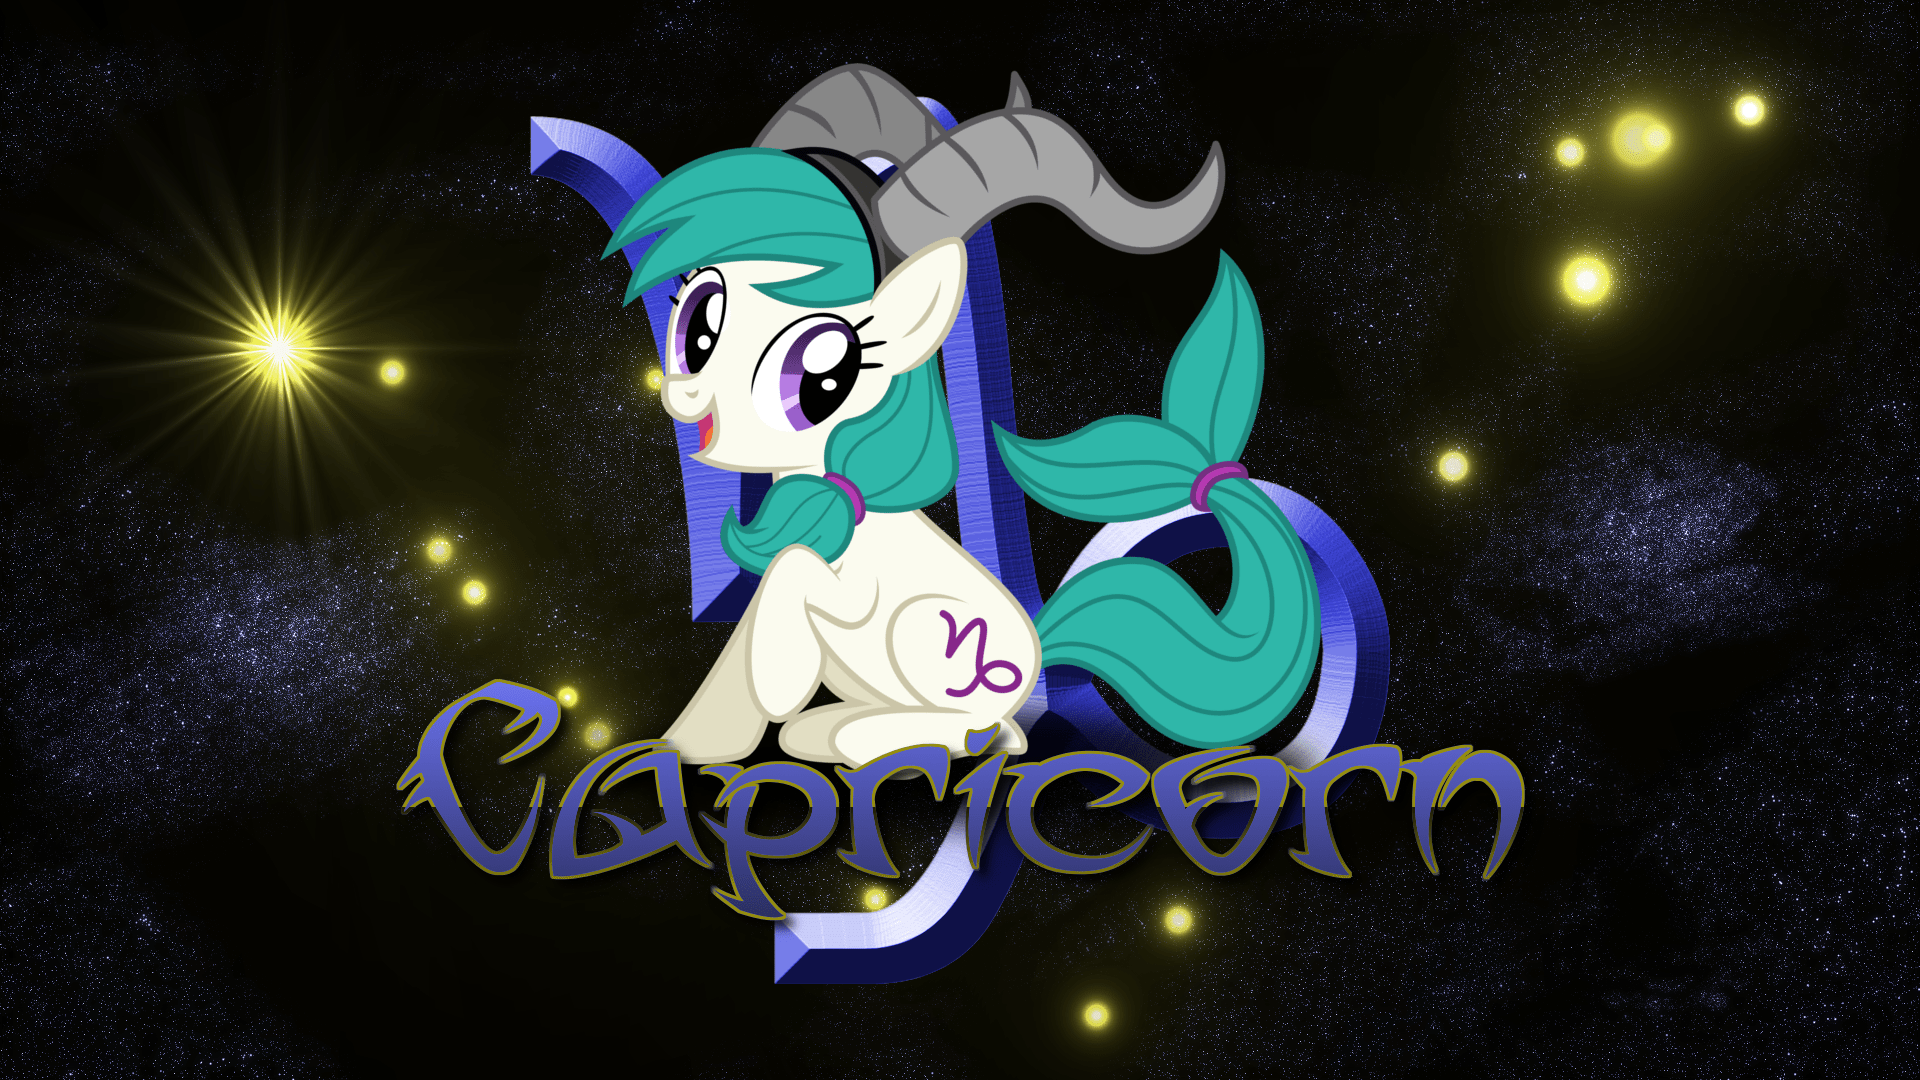 A cute little pony with the word capricorn on it - Capricorn